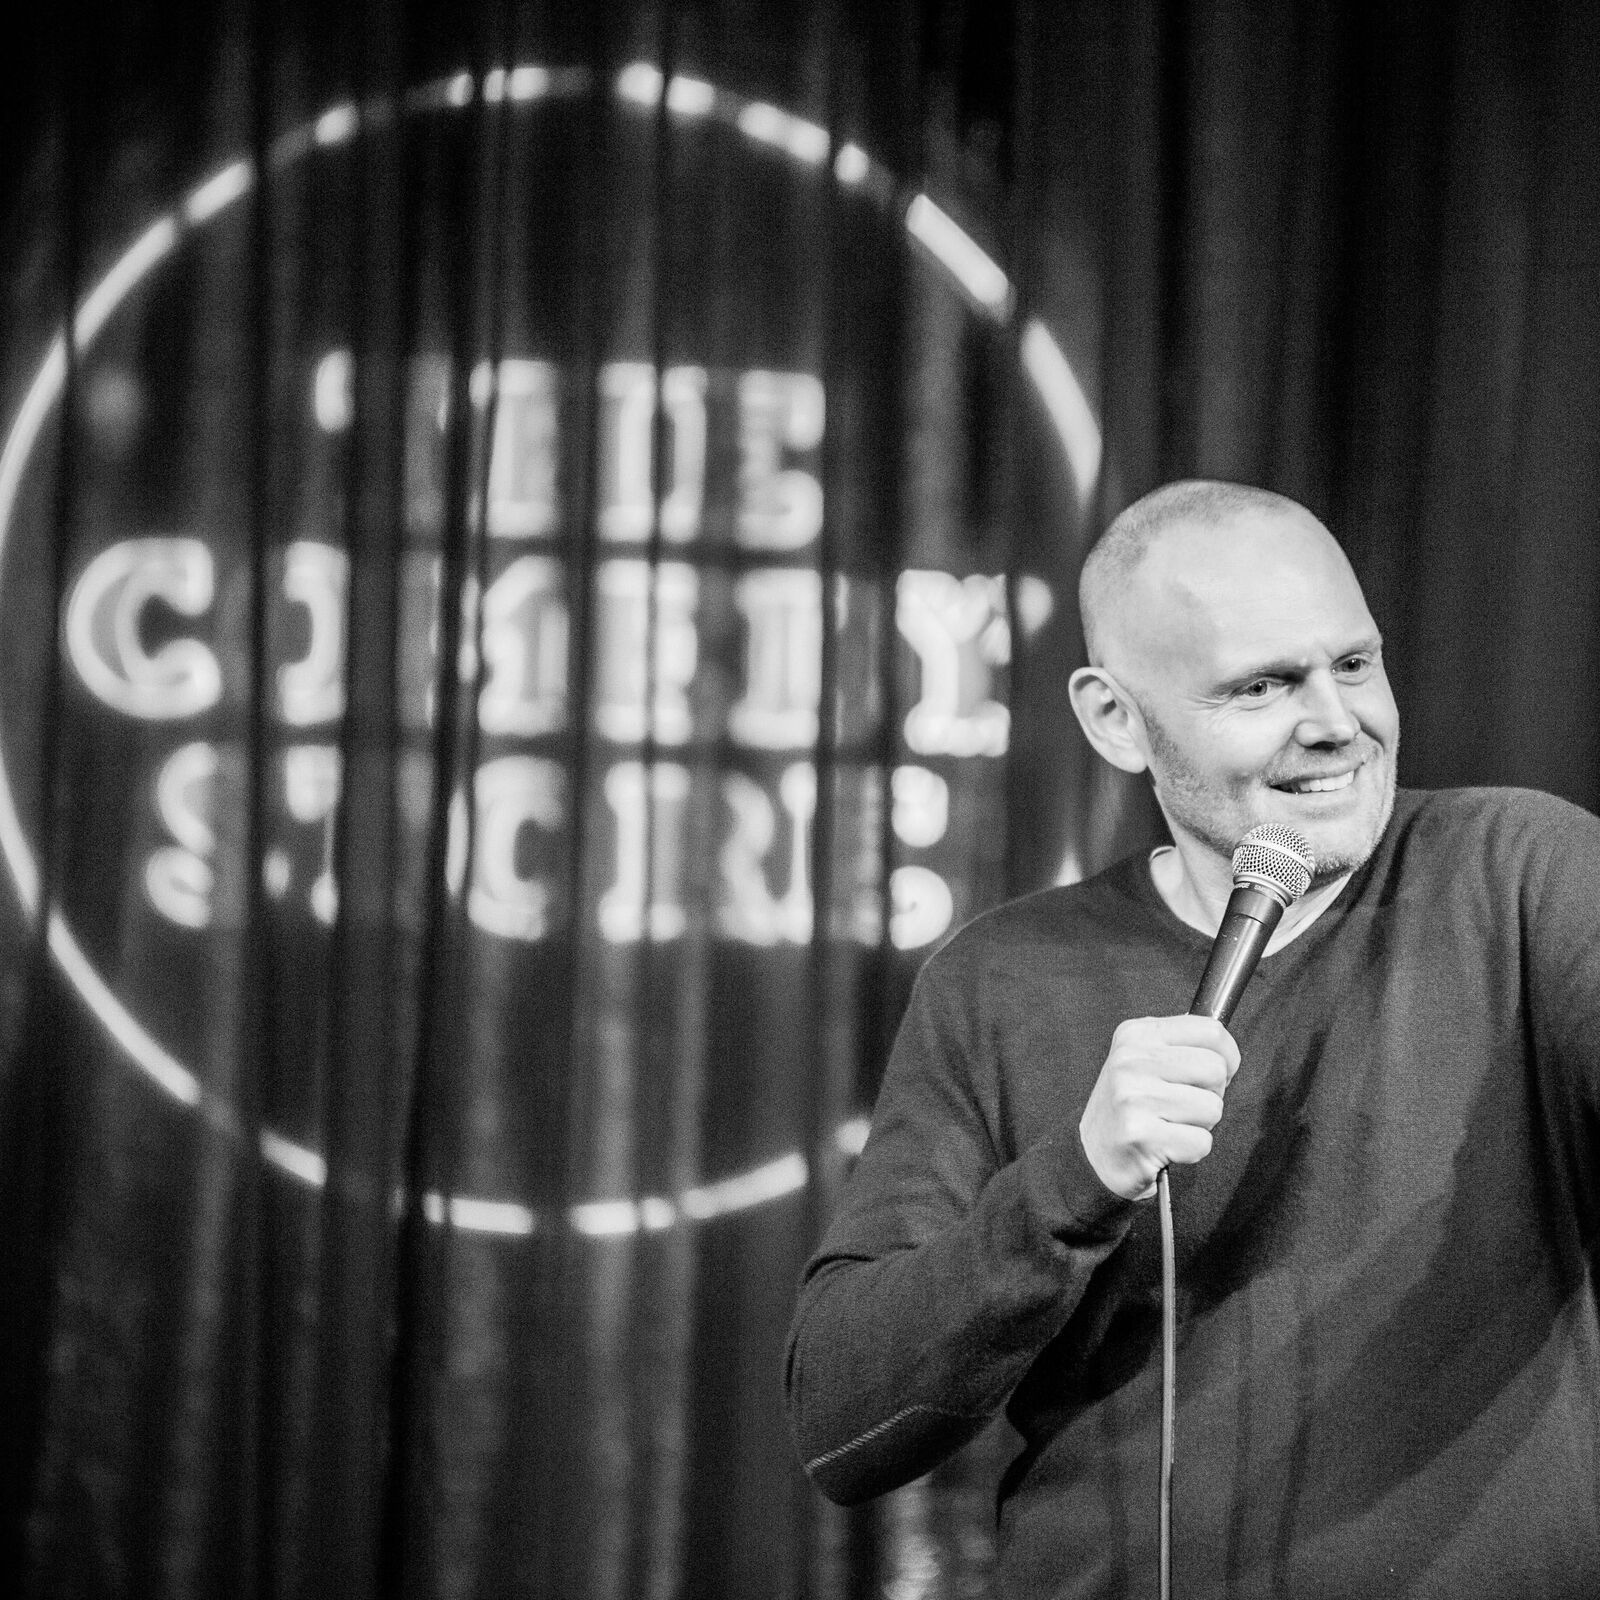 323: Doing A Tight Five On The Comedy Store